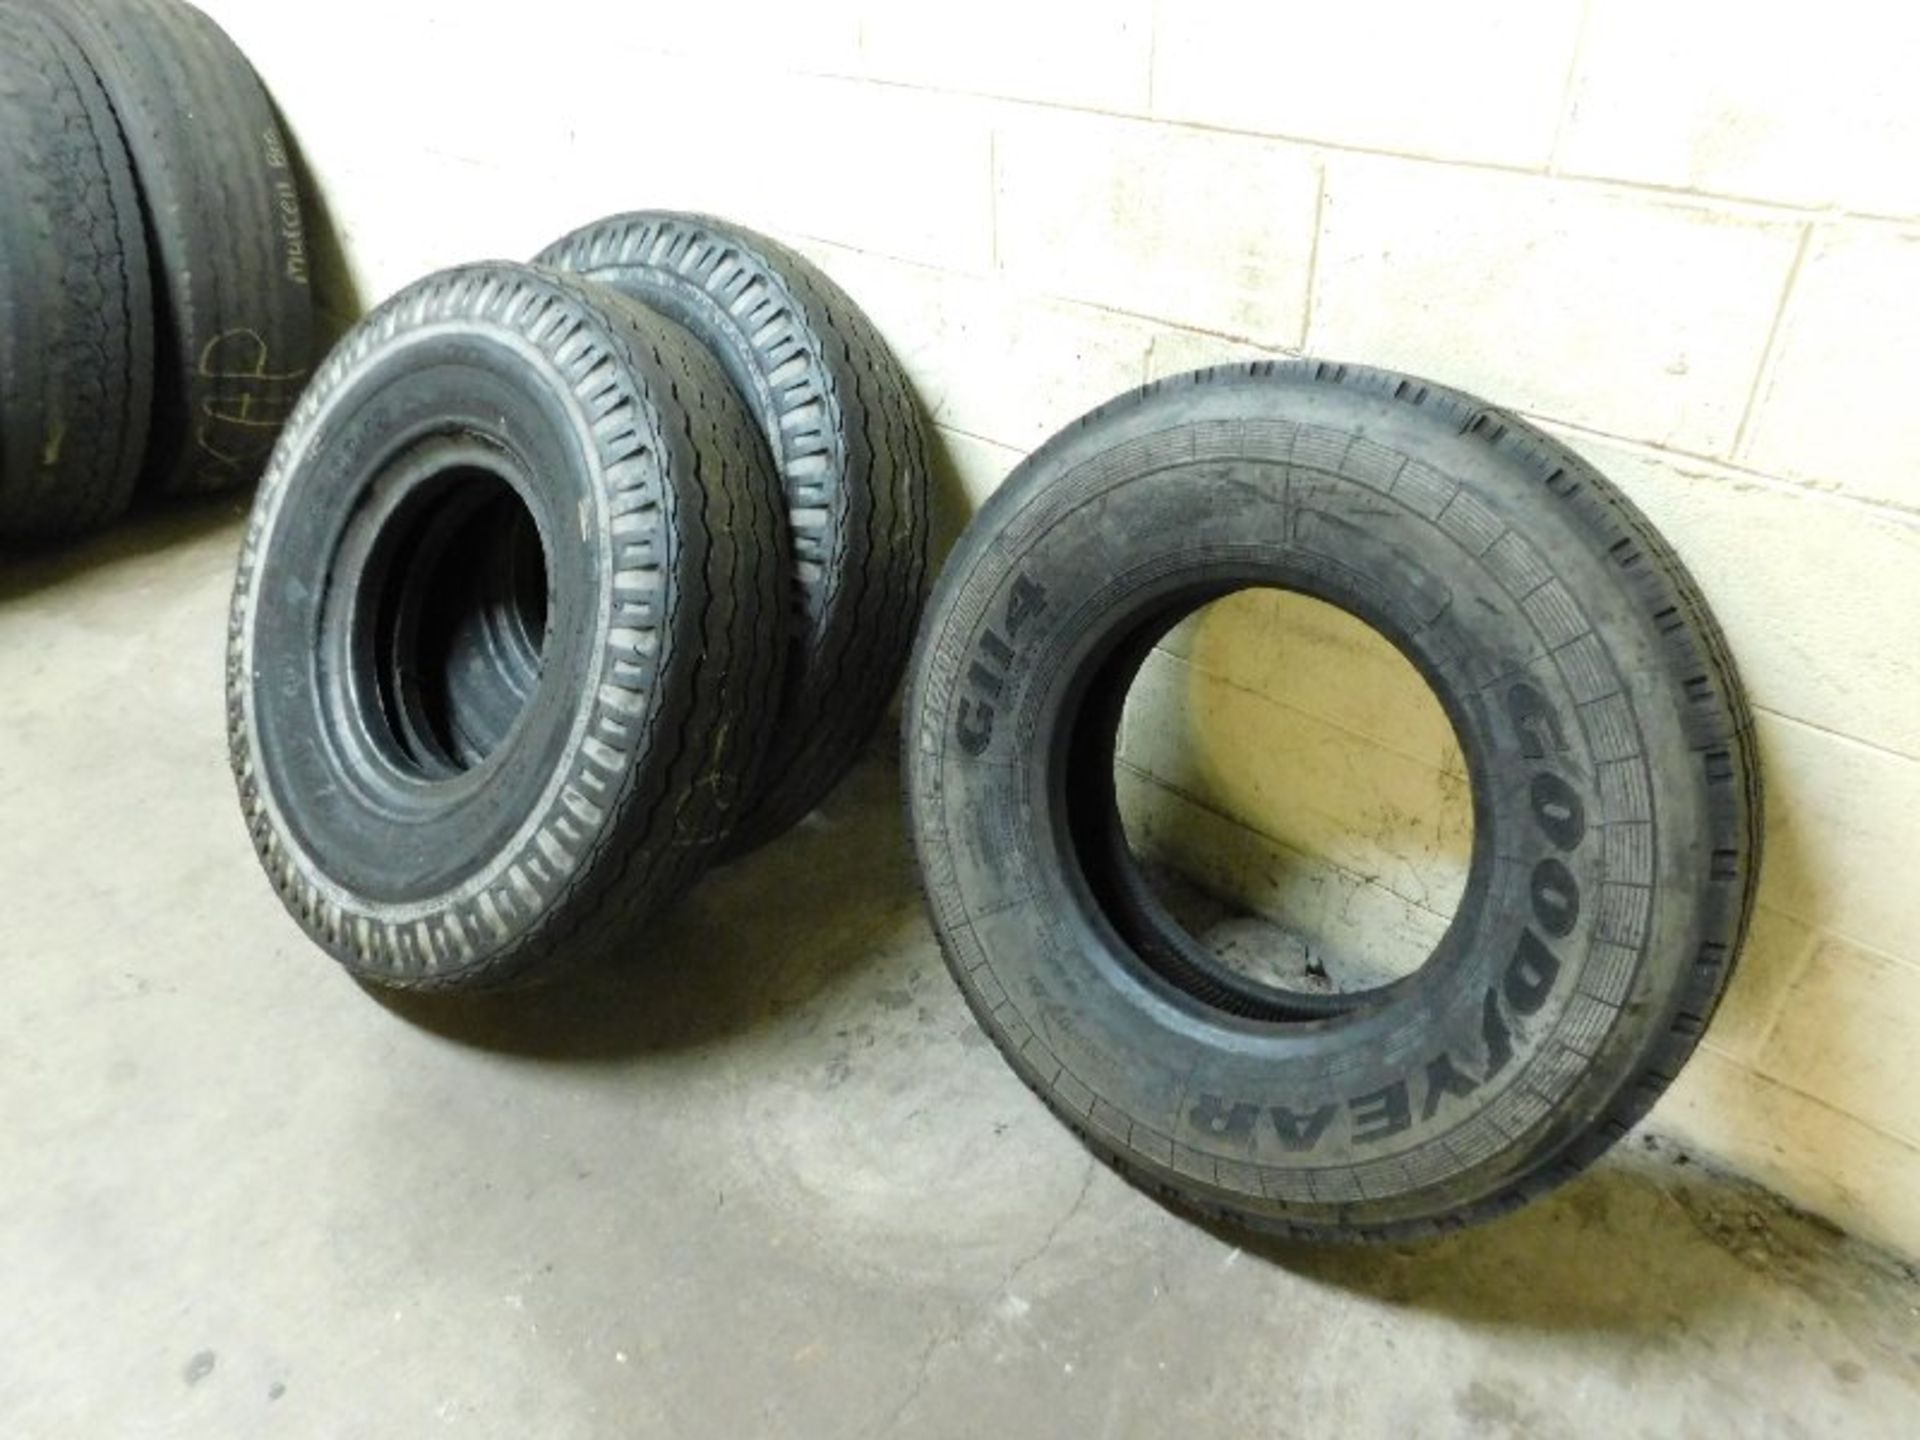 All Truck Tires in Room Used and Retread, Assorted Size and Types, (2) 9R22.5 Retreads, (1) 10.00R20 - Image 4 of 5